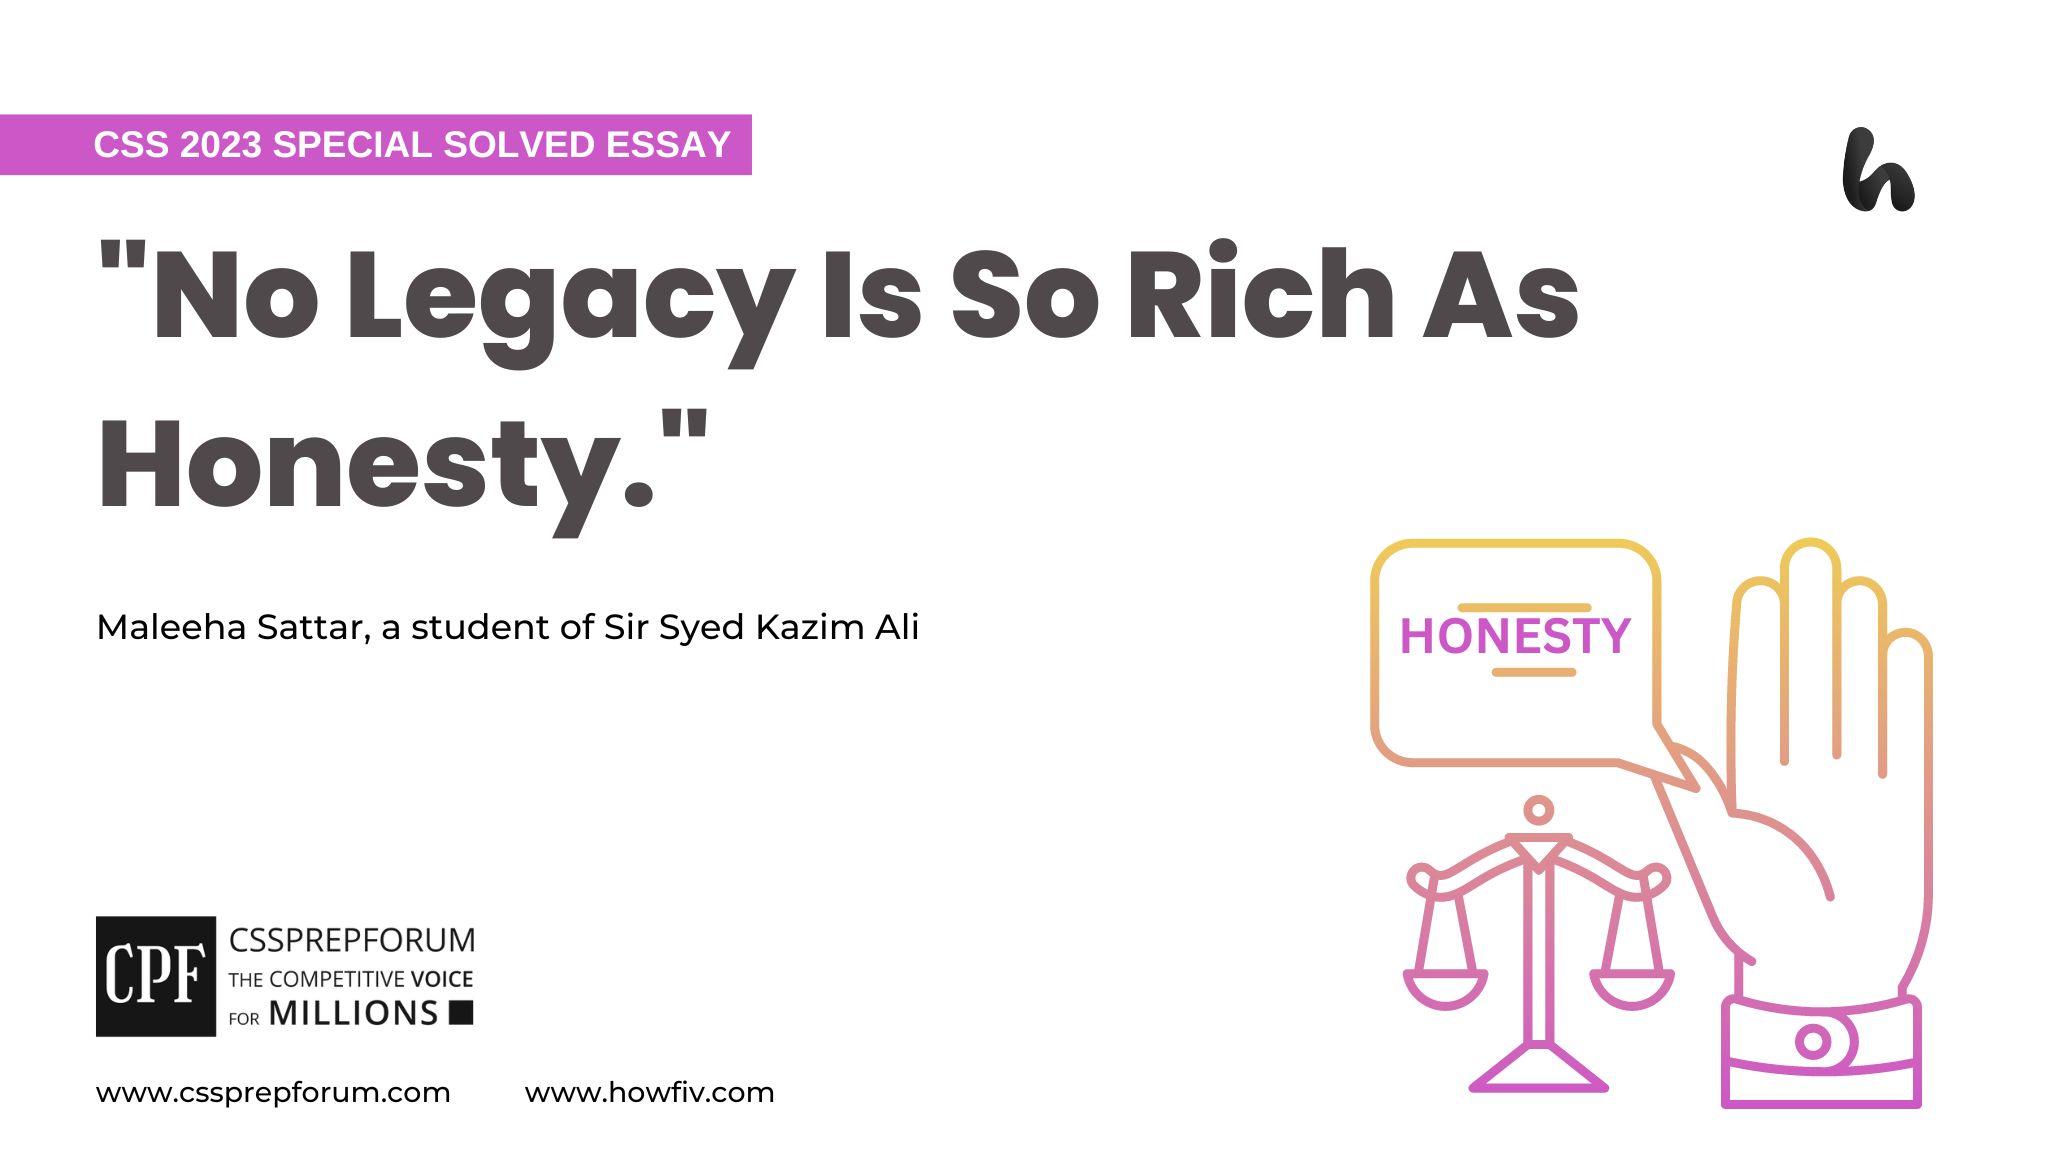 "No Legacy Is So Rich As Honesty." By Maleeha Sattar